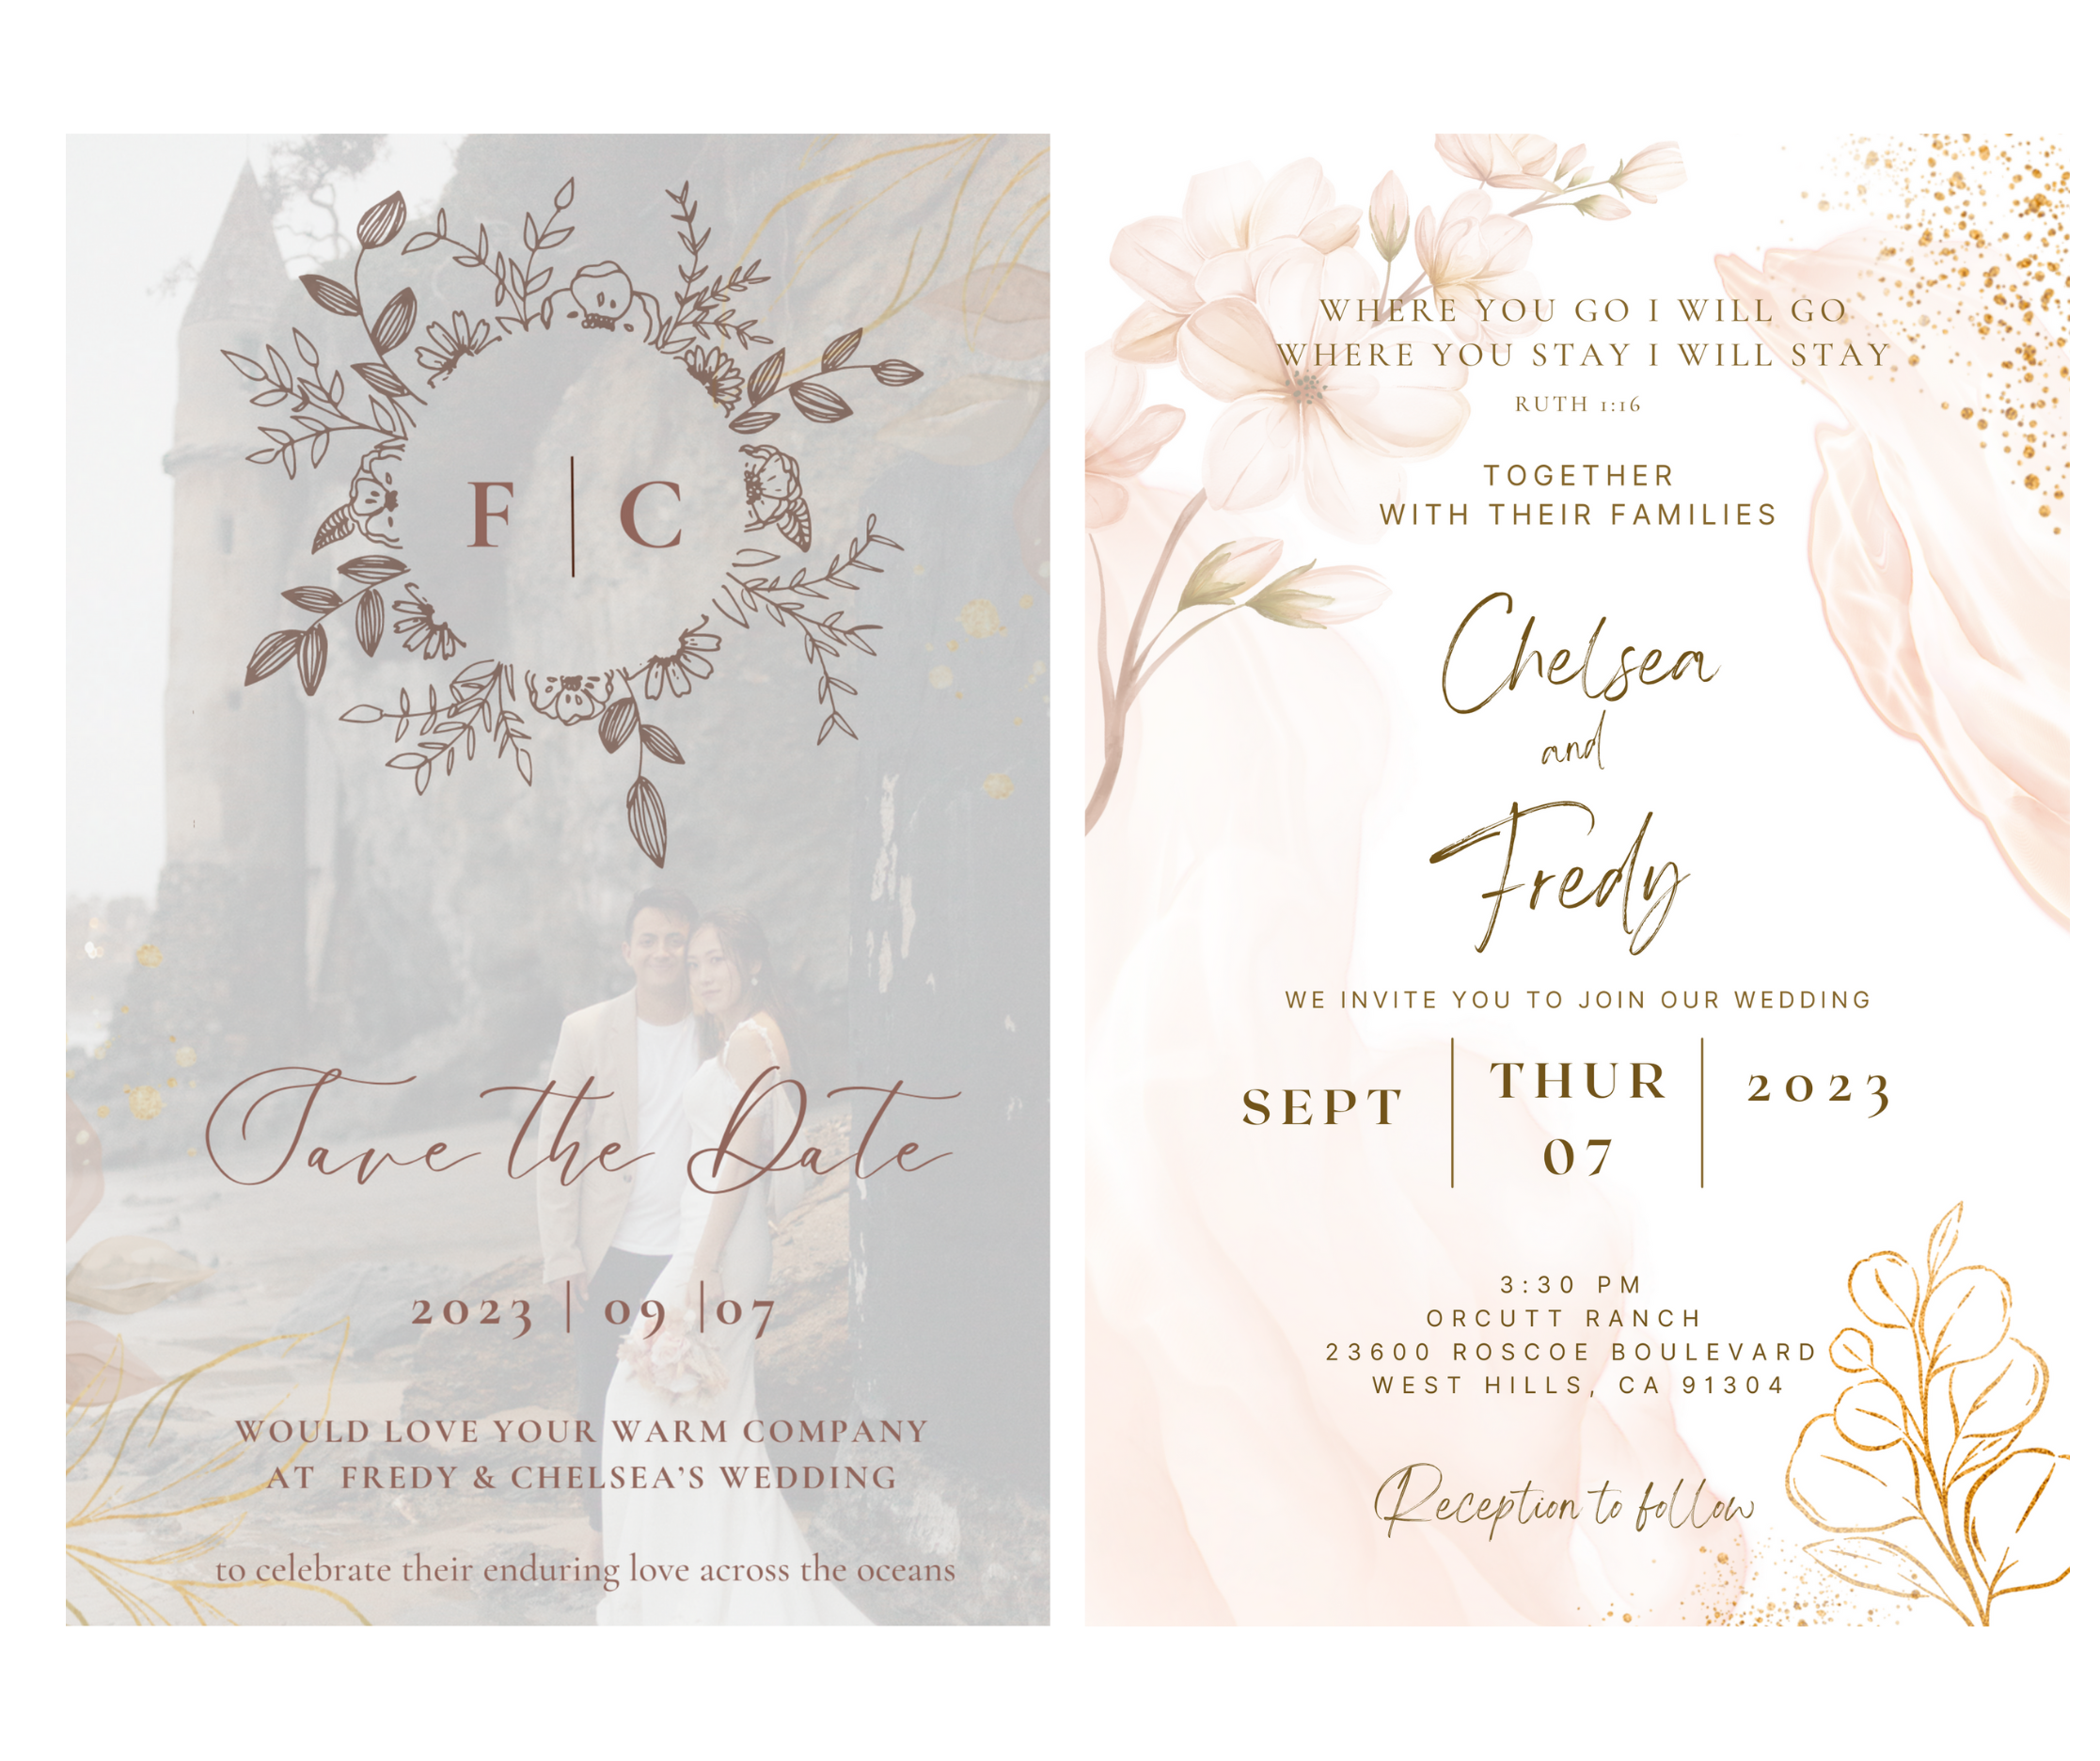 The Wedding Website of Chelsea Lo and Fredy Chavez